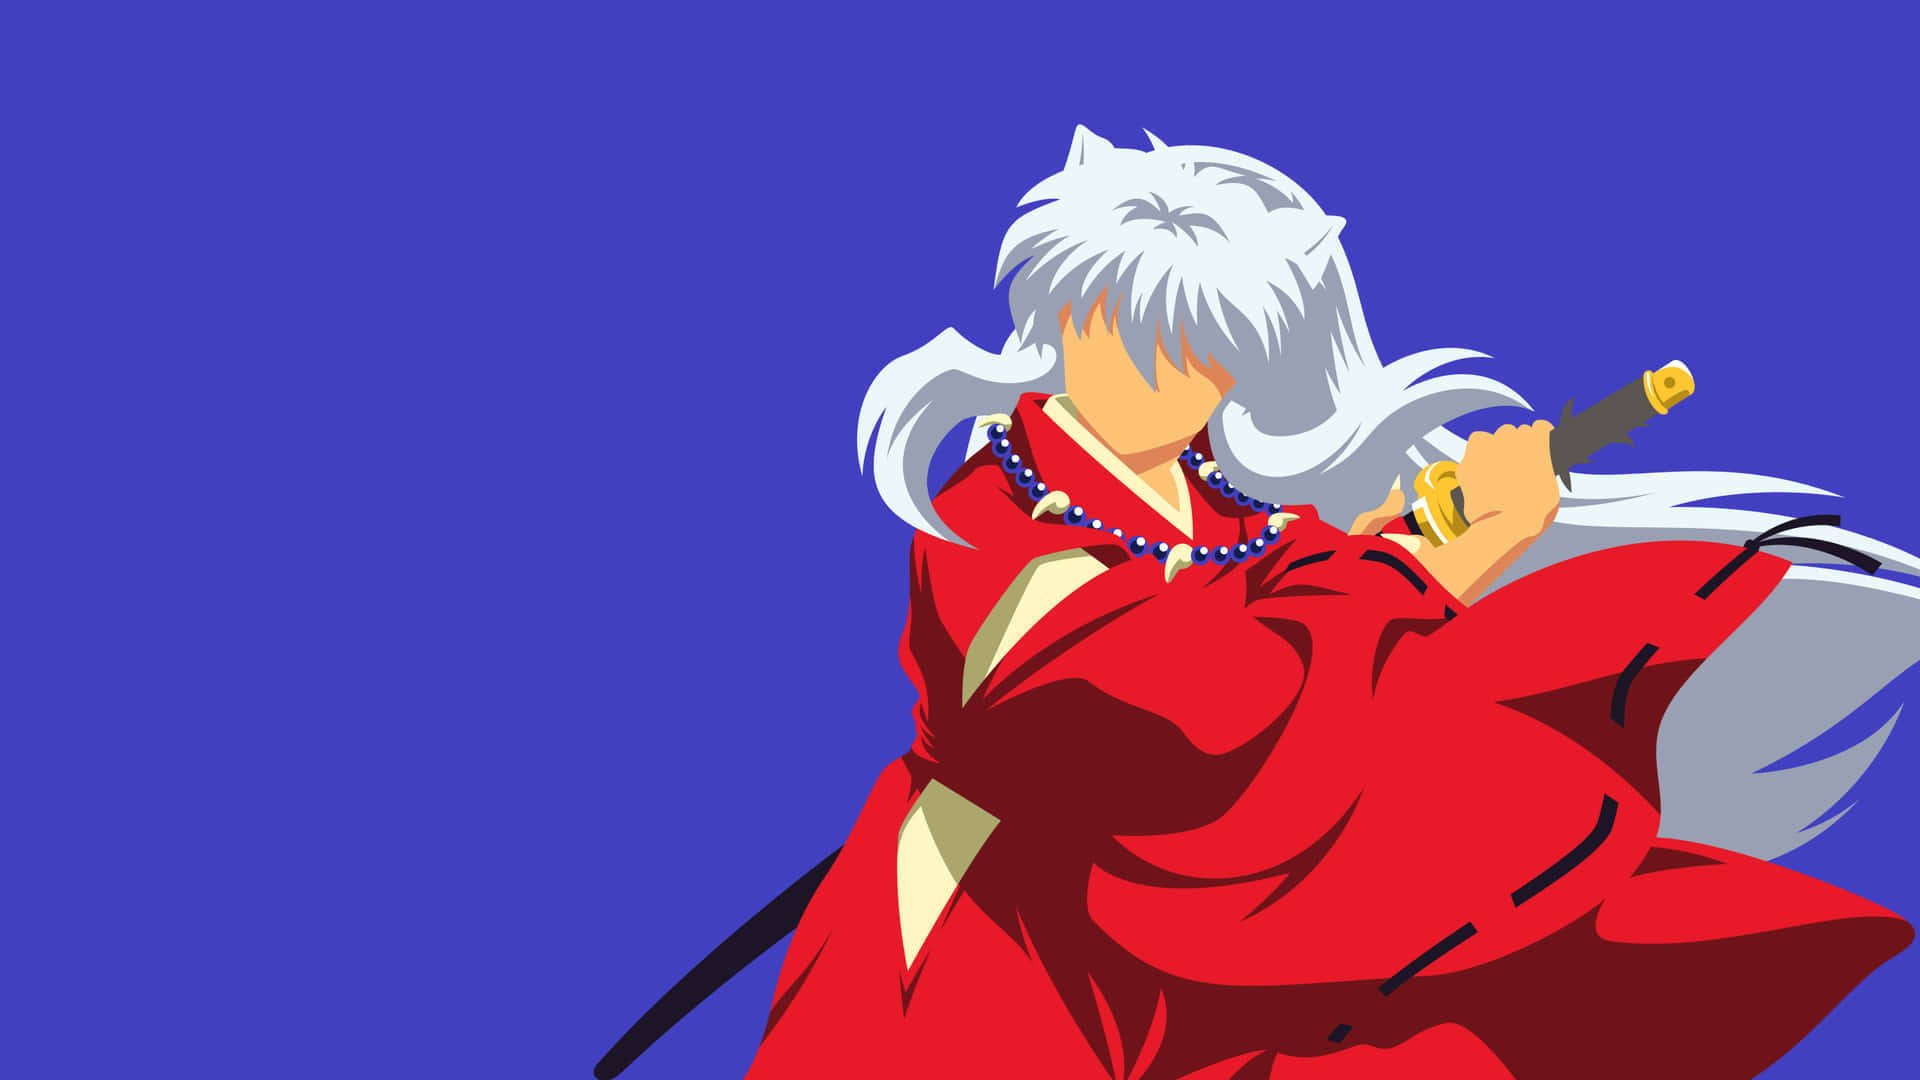 Inuyasha and Kagome share a romantic moment in their ancient Japanese world.